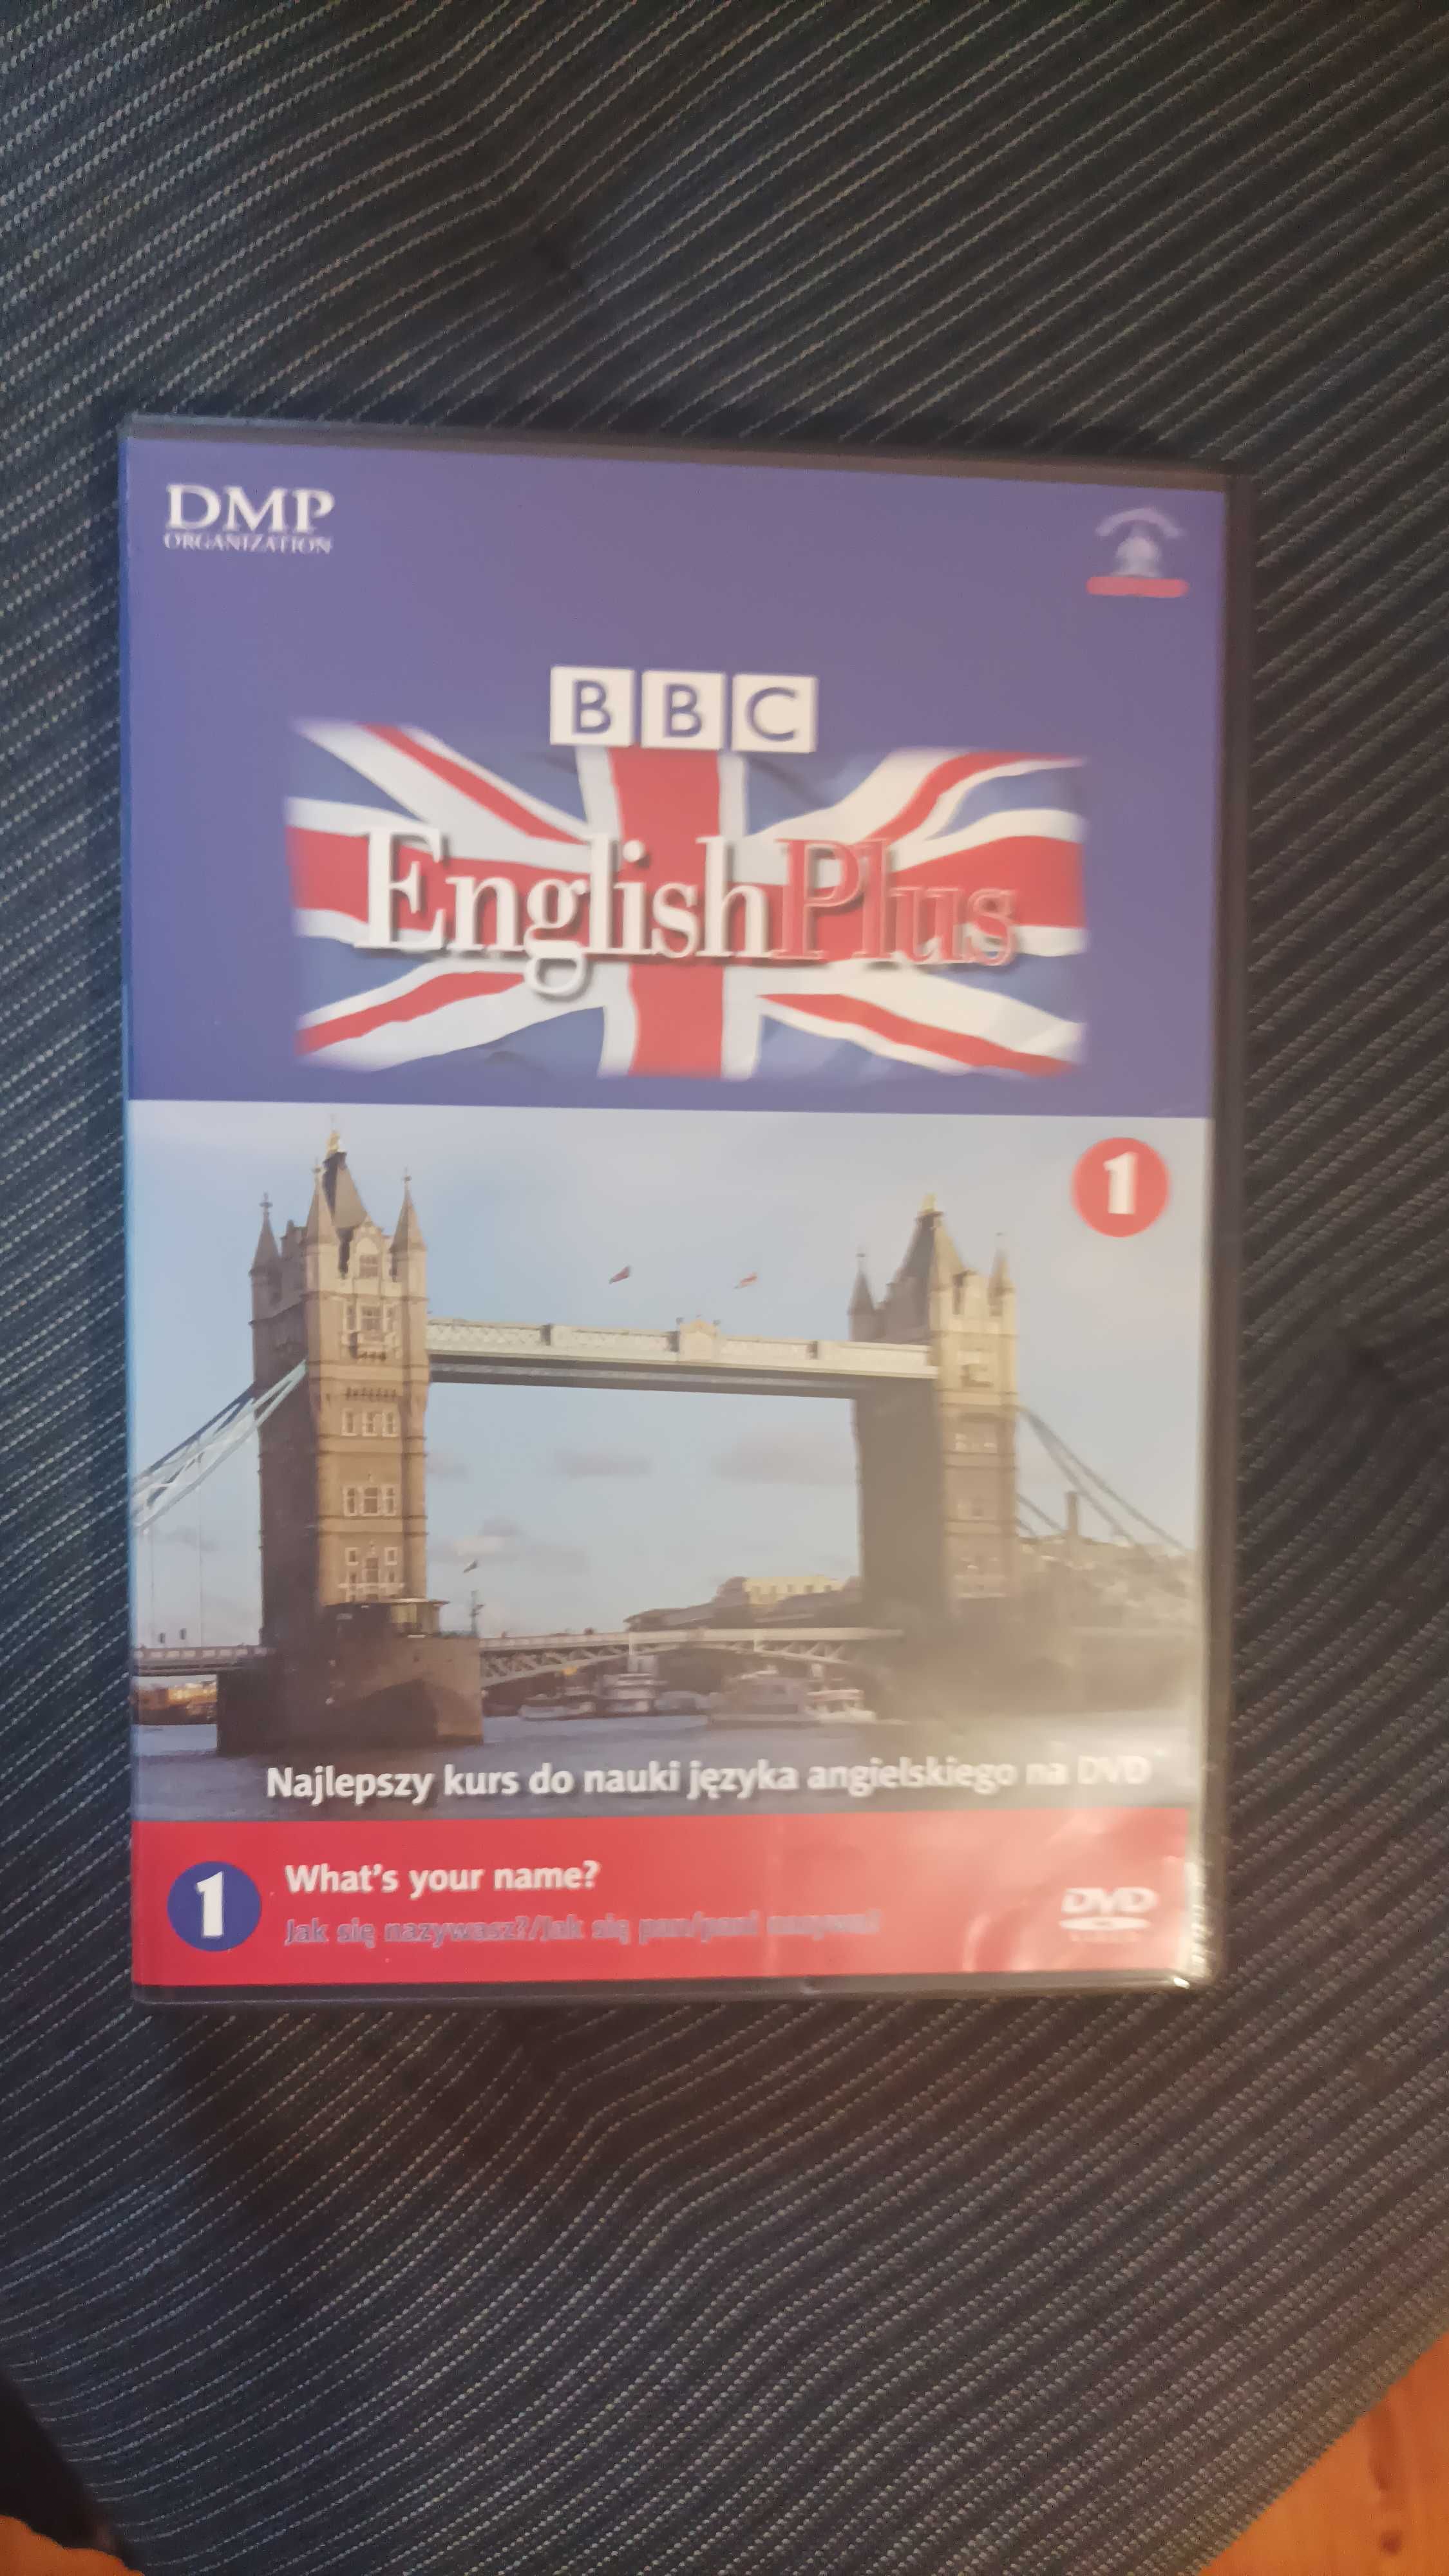 BBC English plus płyta DVD What's your name? kl.4 sp "to be"